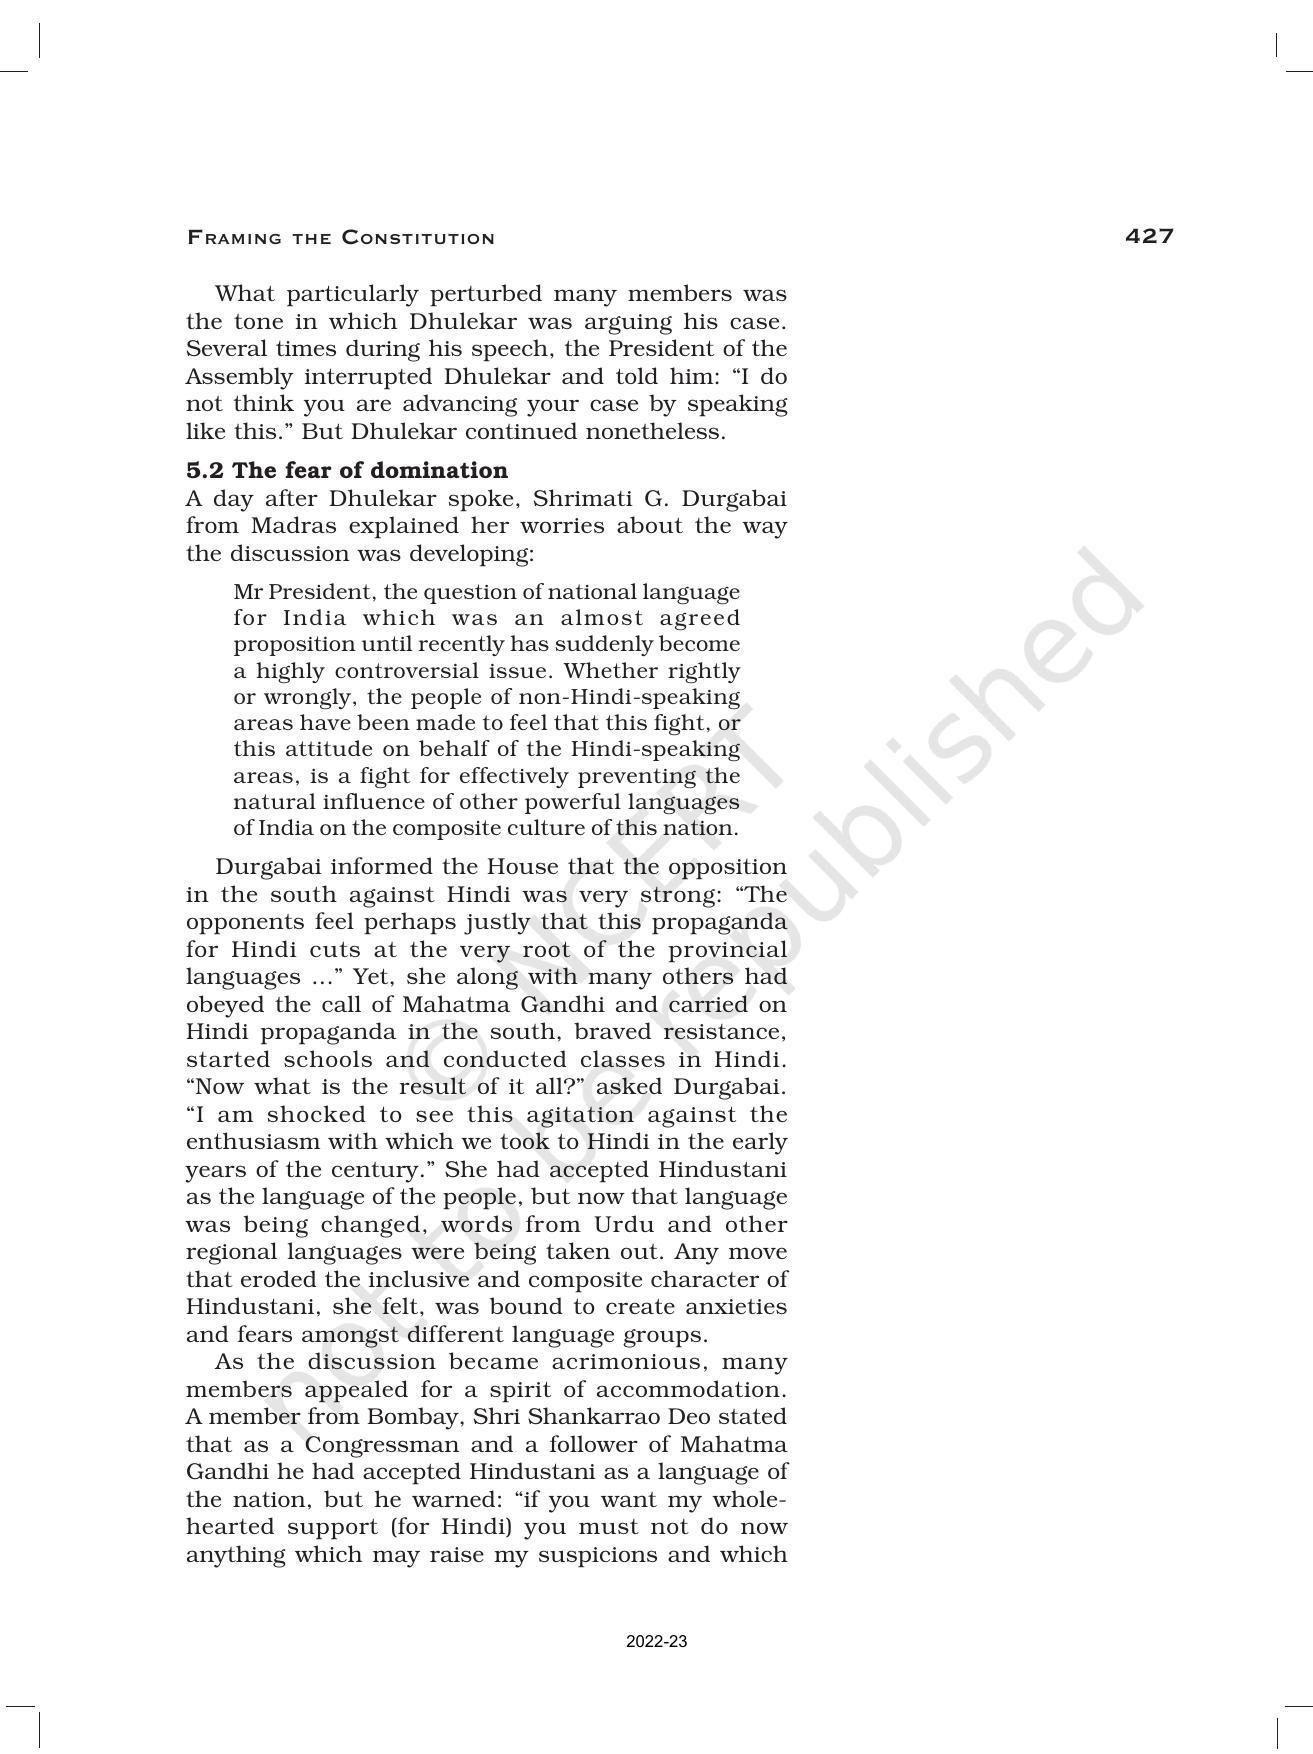 NCERT Book for Class 12 History (Part-III) Chapter 15 Framing and the Constitution - Page 23